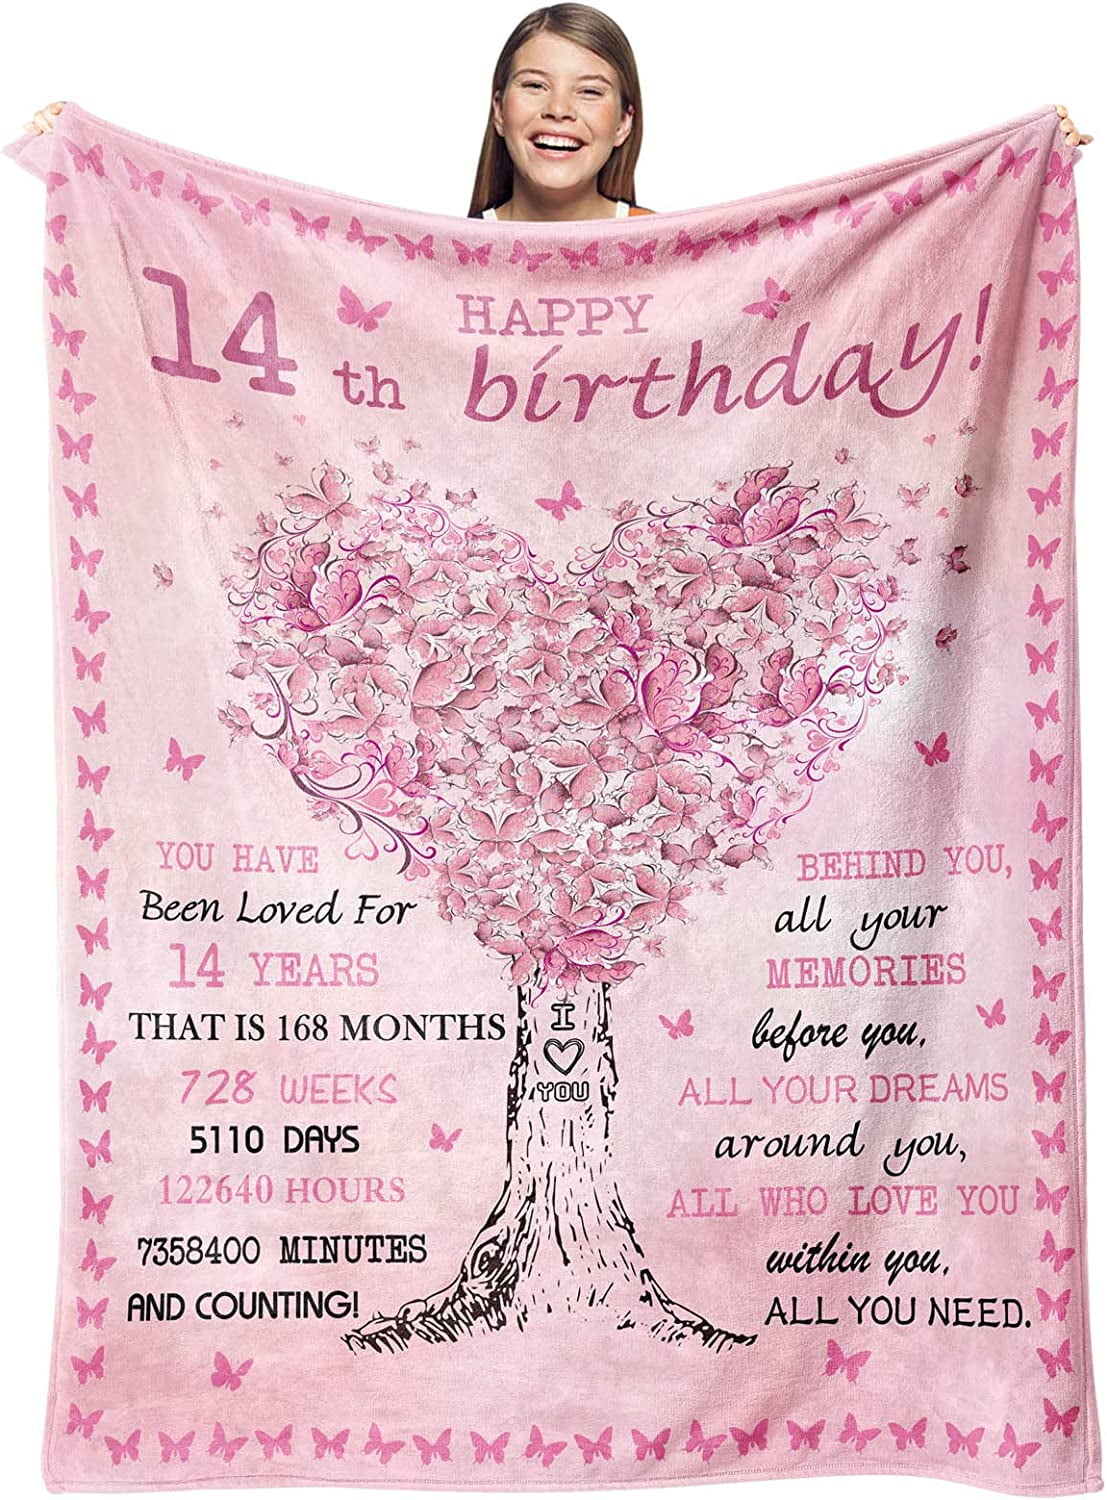 Gifts for 14 Year Old Girl Blankets, 14 Year Old Girl Gift Ideas Throw  50X60, Birthday Gifts for 14 Year Old Girl, 14th Birthday Decorations/ Gifts for Girls, Teen Girl Gifts 14 Years